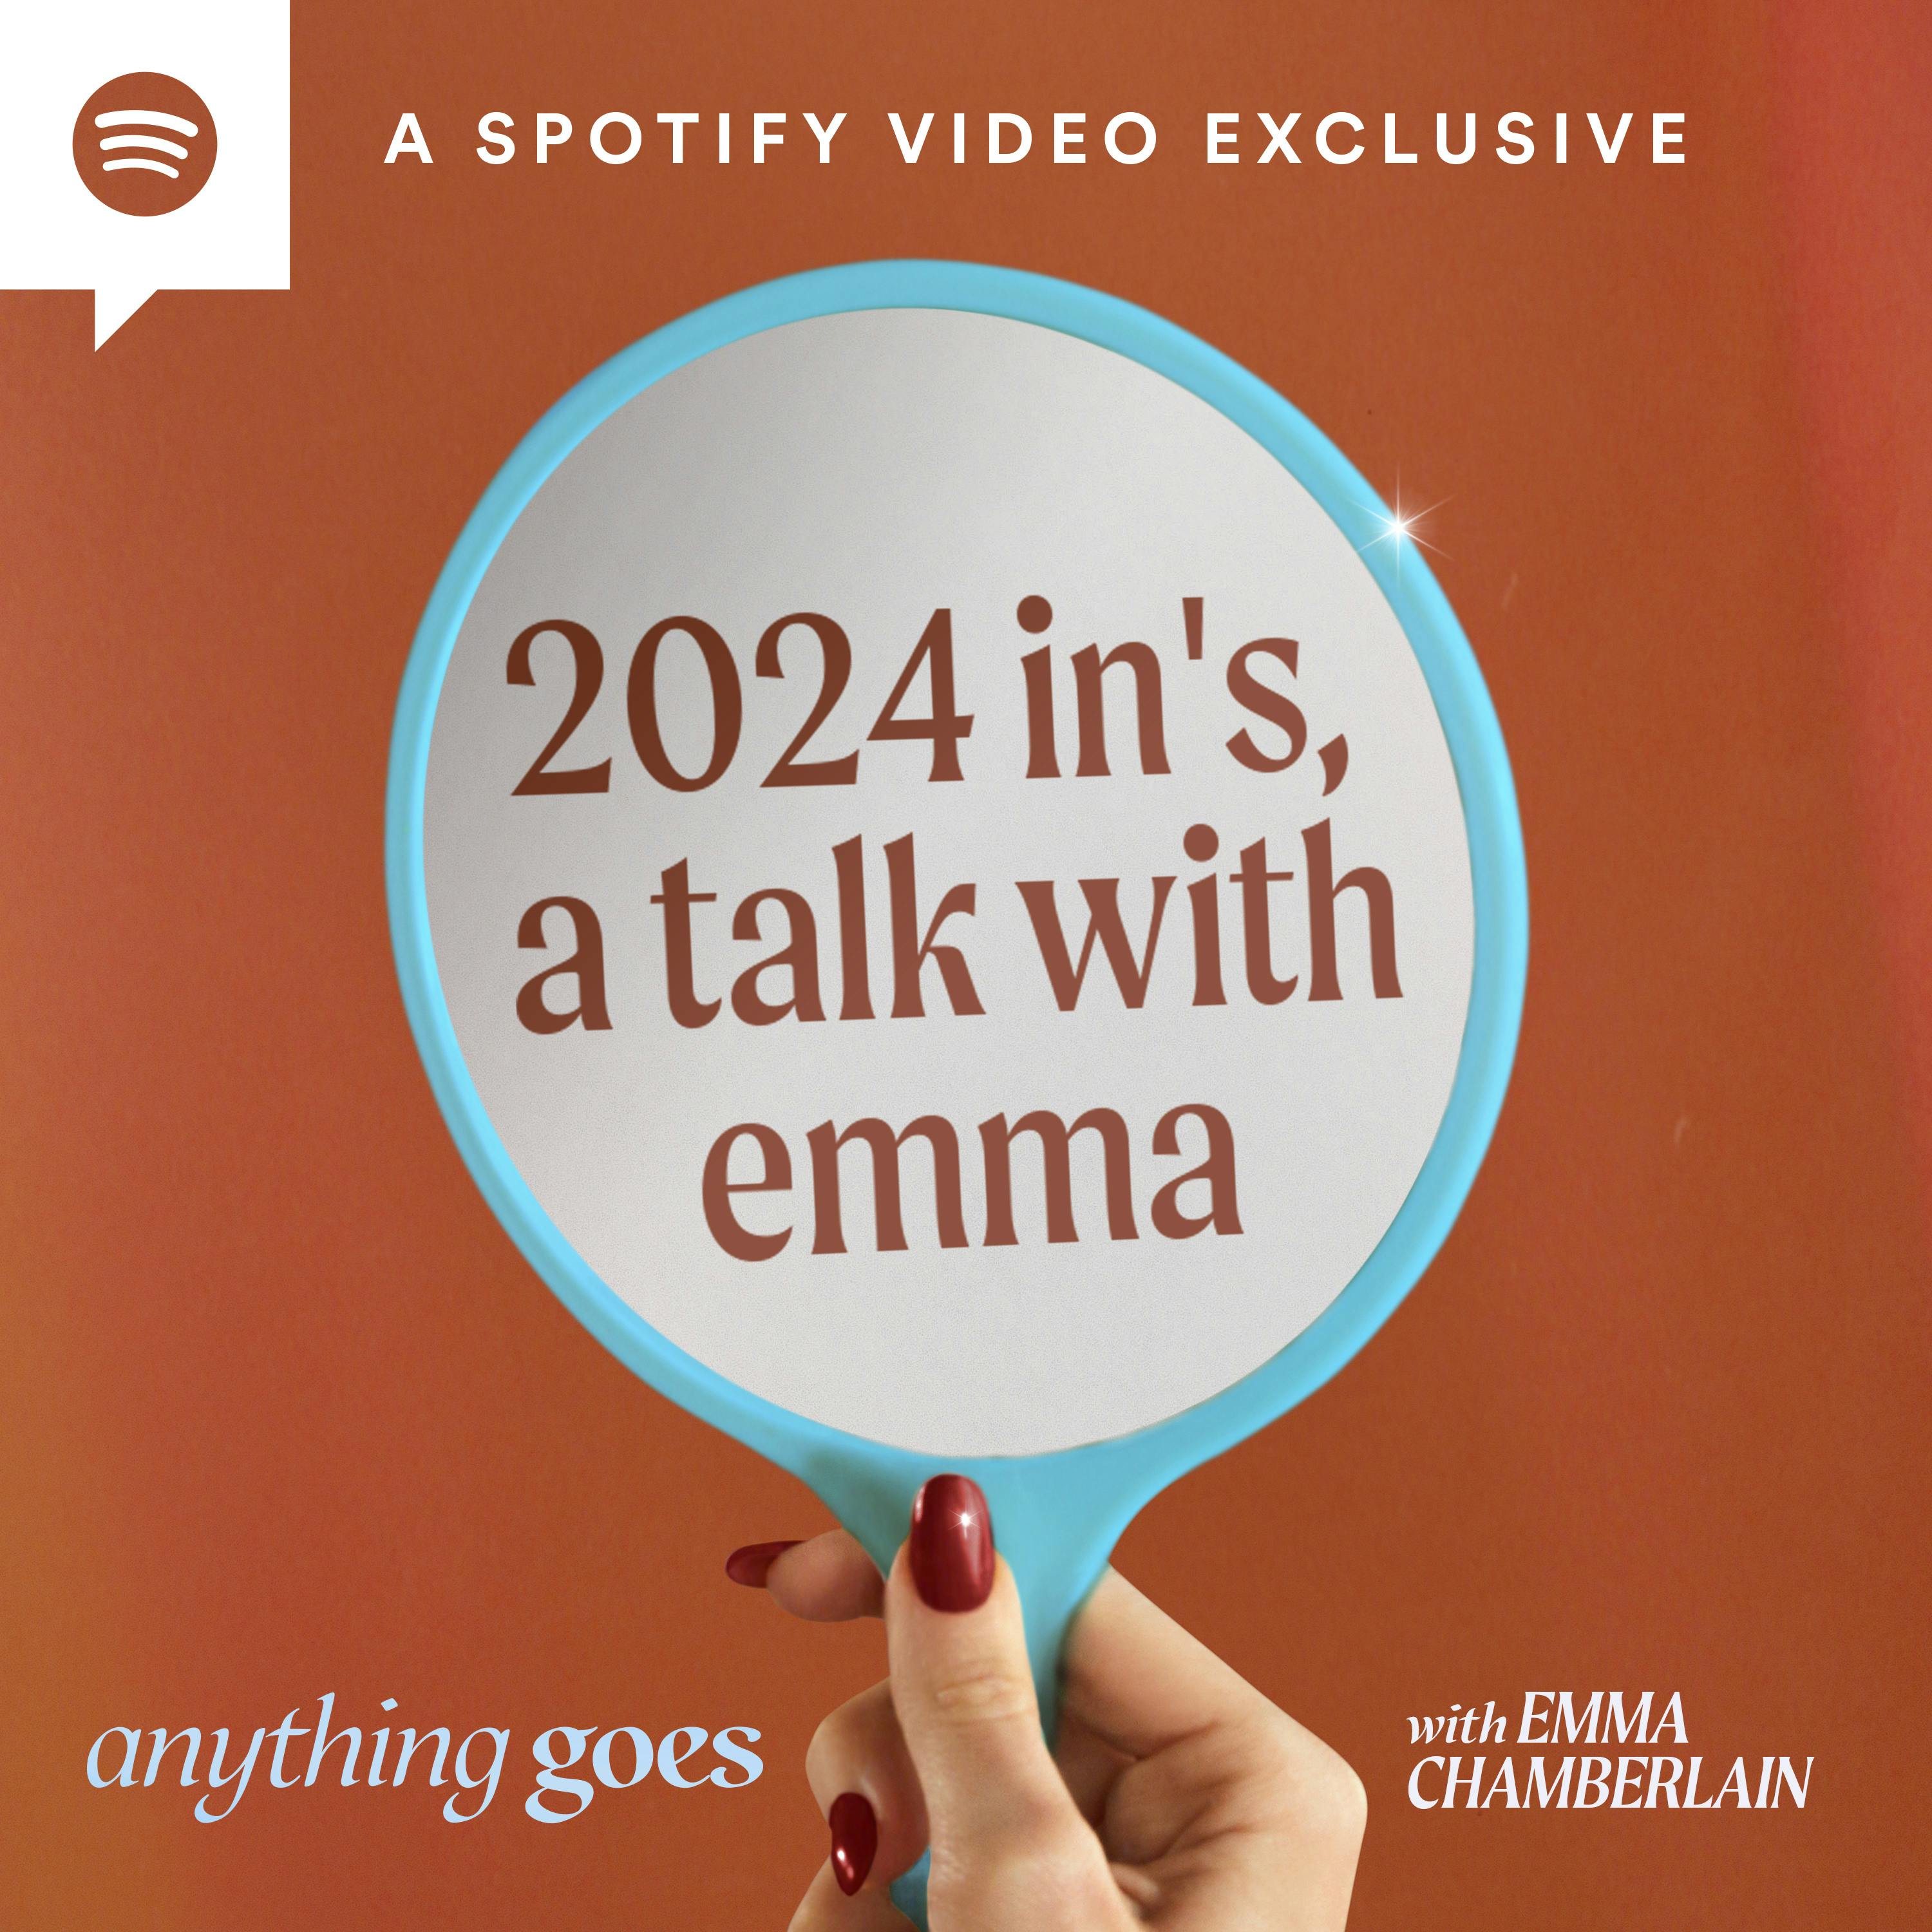 2024 in's, a talk with emma